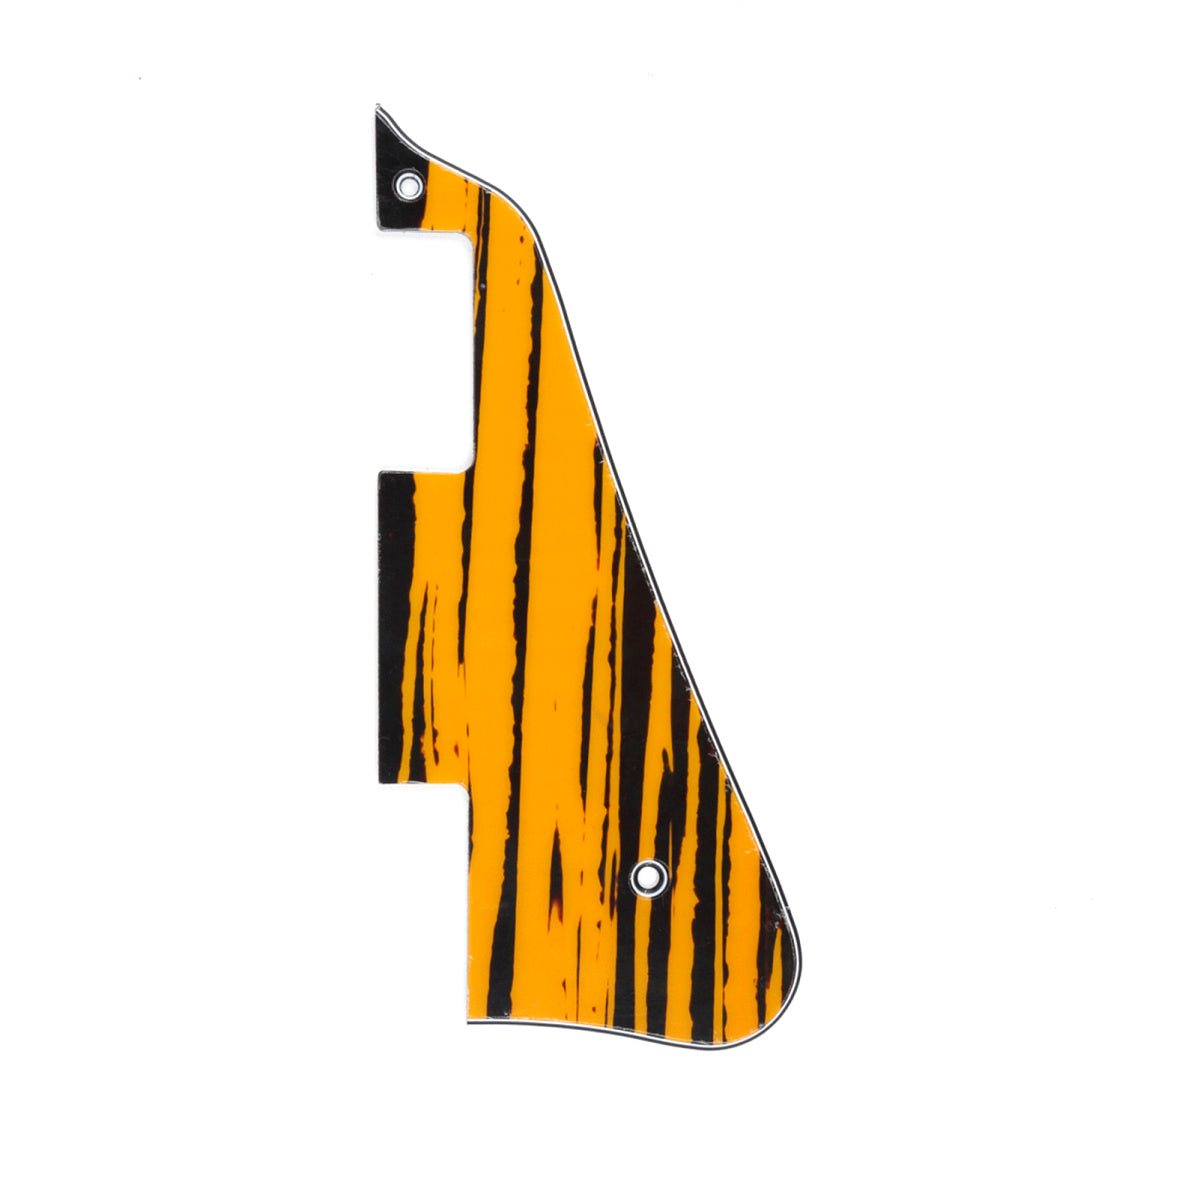 Musiclily Guitar Pickguard for China Made Epiphone Les Paul Standard Modern Style, 4Ply Yellow Black